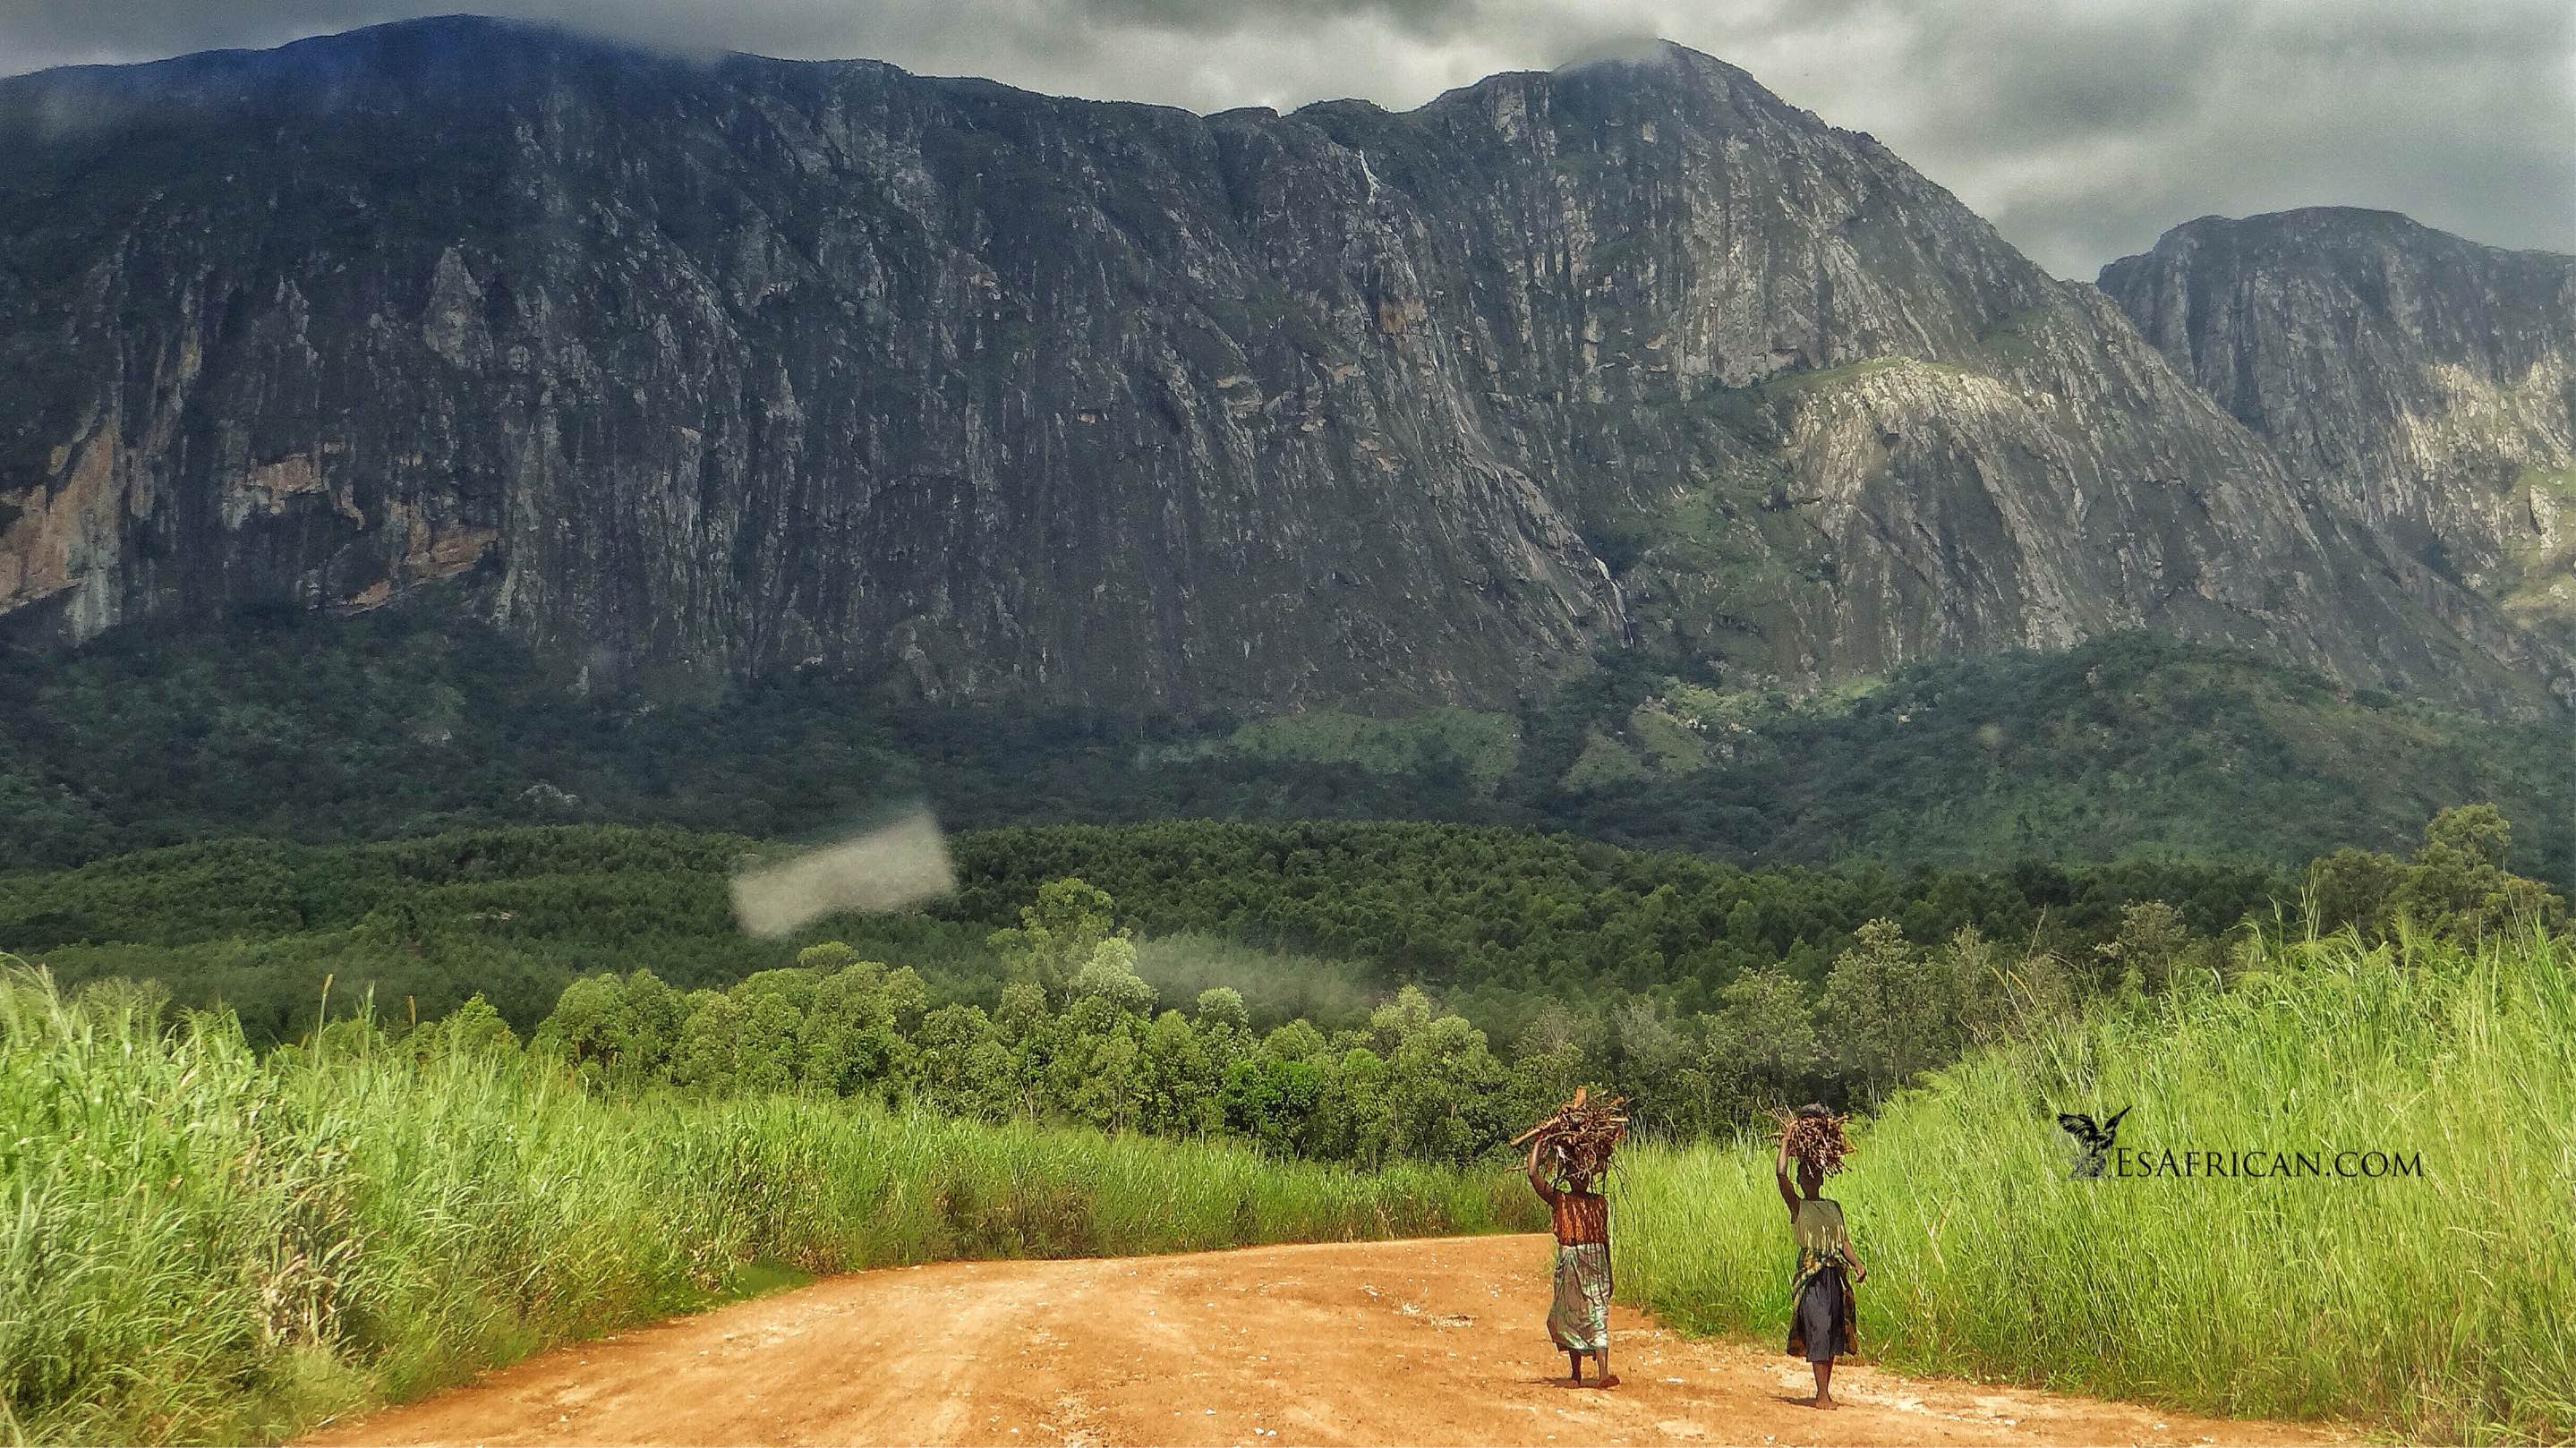 Mulanje: our brief introduction to travel in Malawi does not include rock-climbing or swimming... These should come later. A brief word about walking is appropriate in a post that is intended to mainly cover road travel.